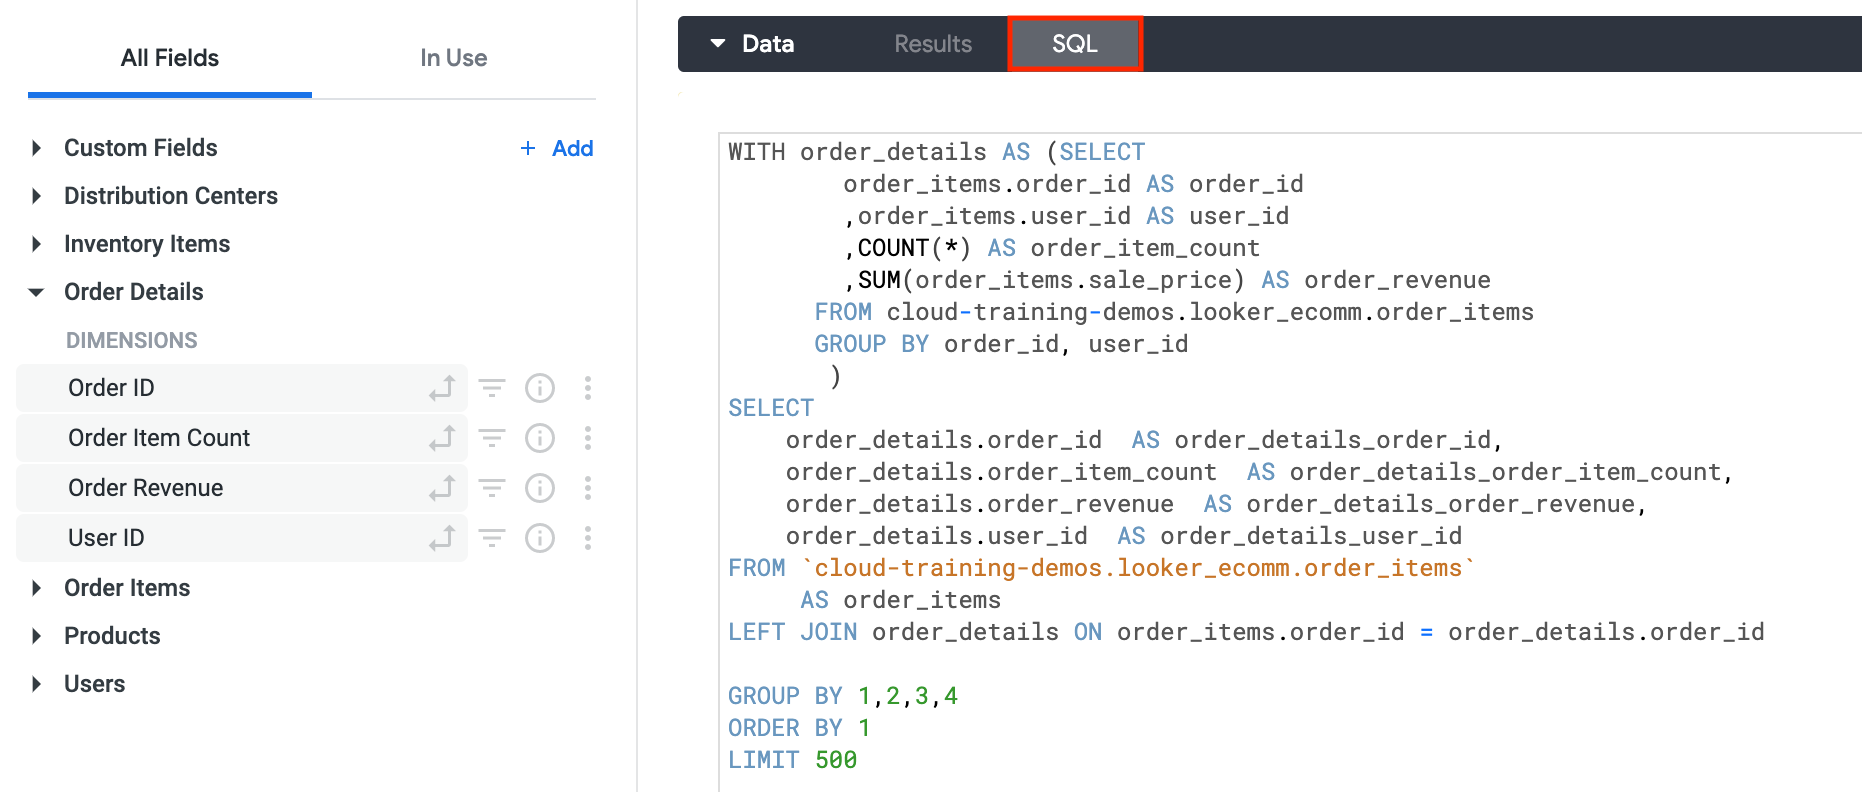 SQL tabbed page displaying the generated SQL query